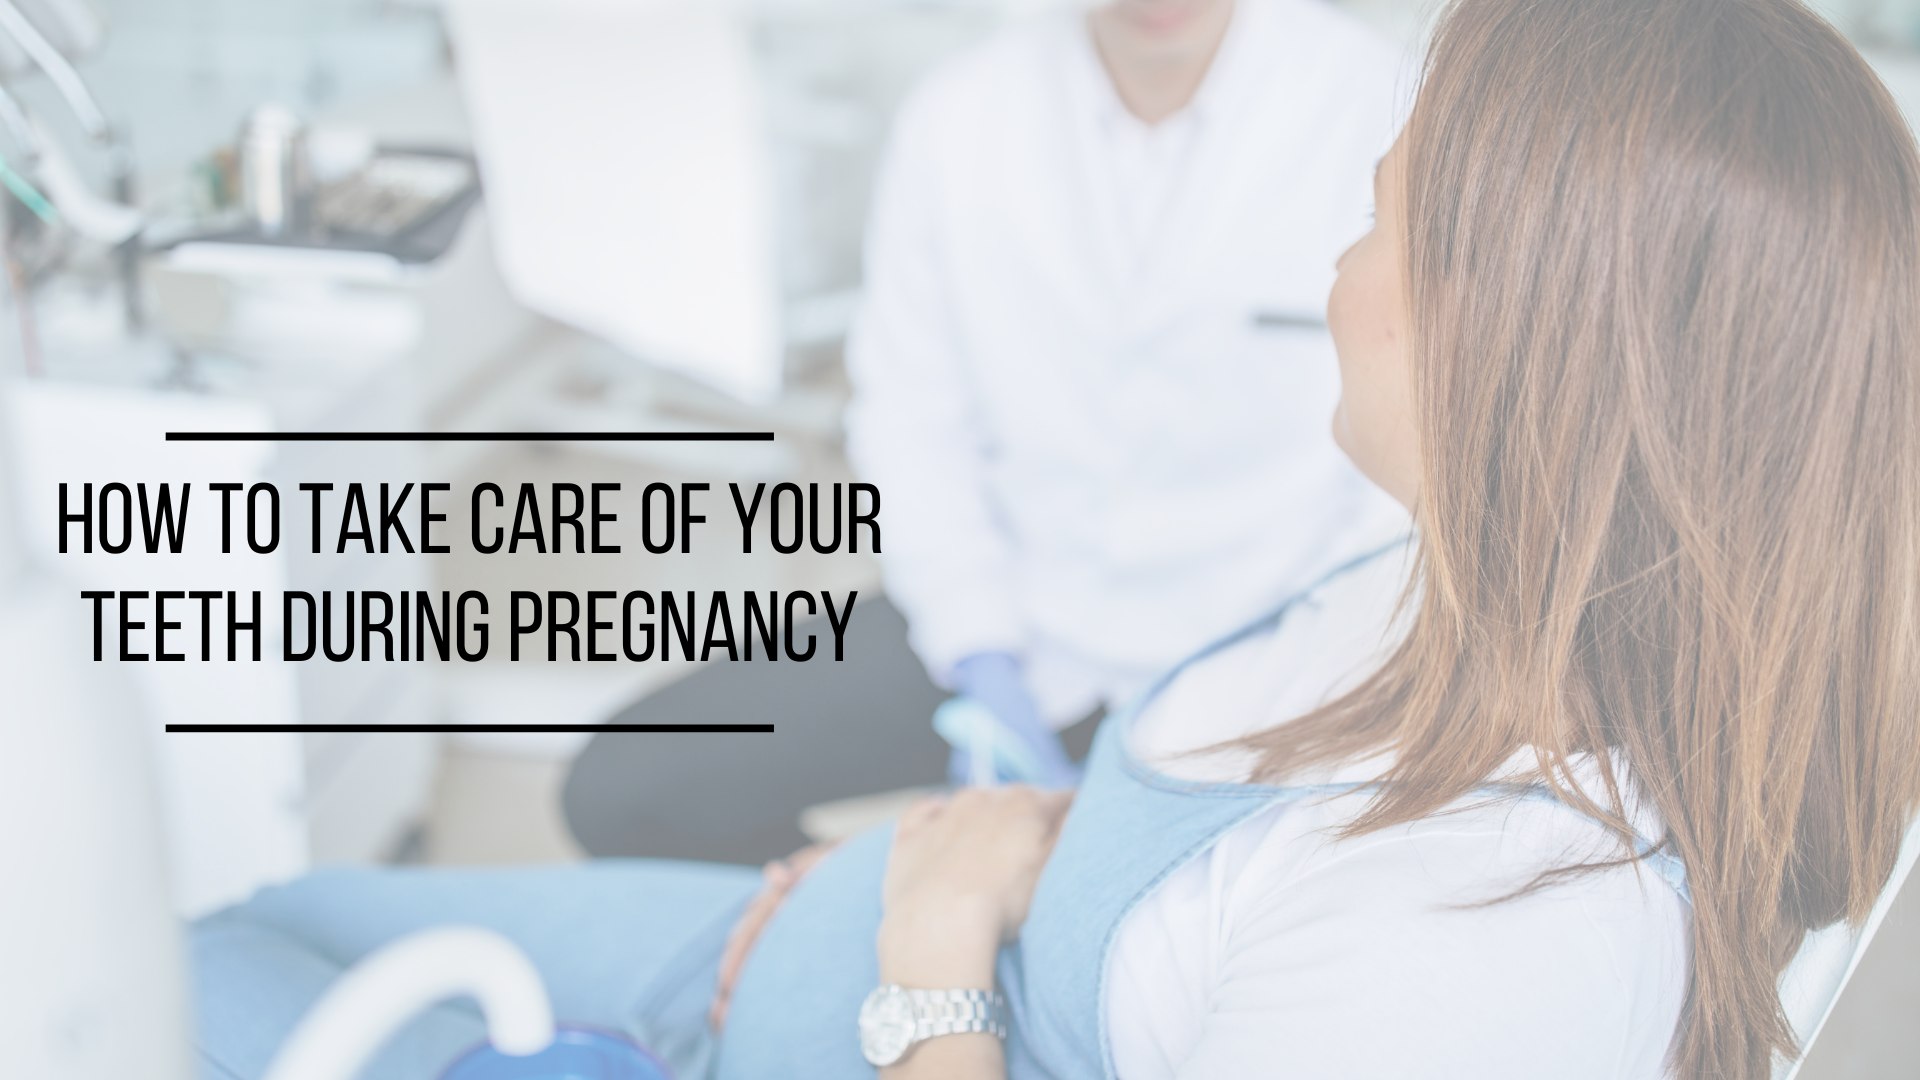 How to Take Care Of Your Teeth During Pregnancy